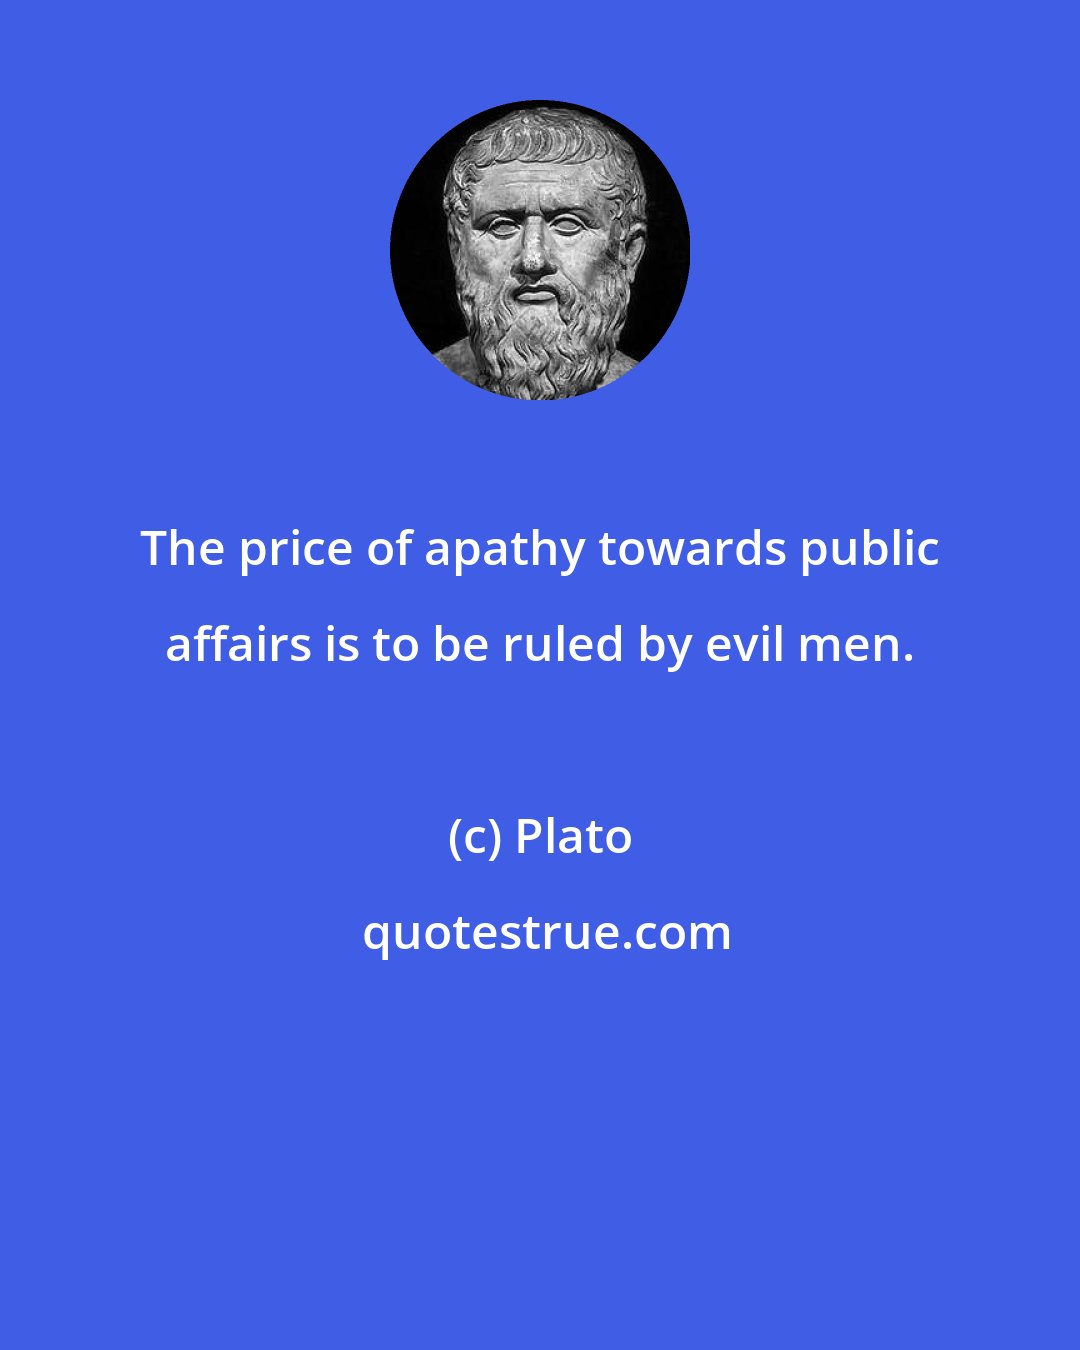 Plato: The price of apathy towards public affairs is to be ruled by evil men.